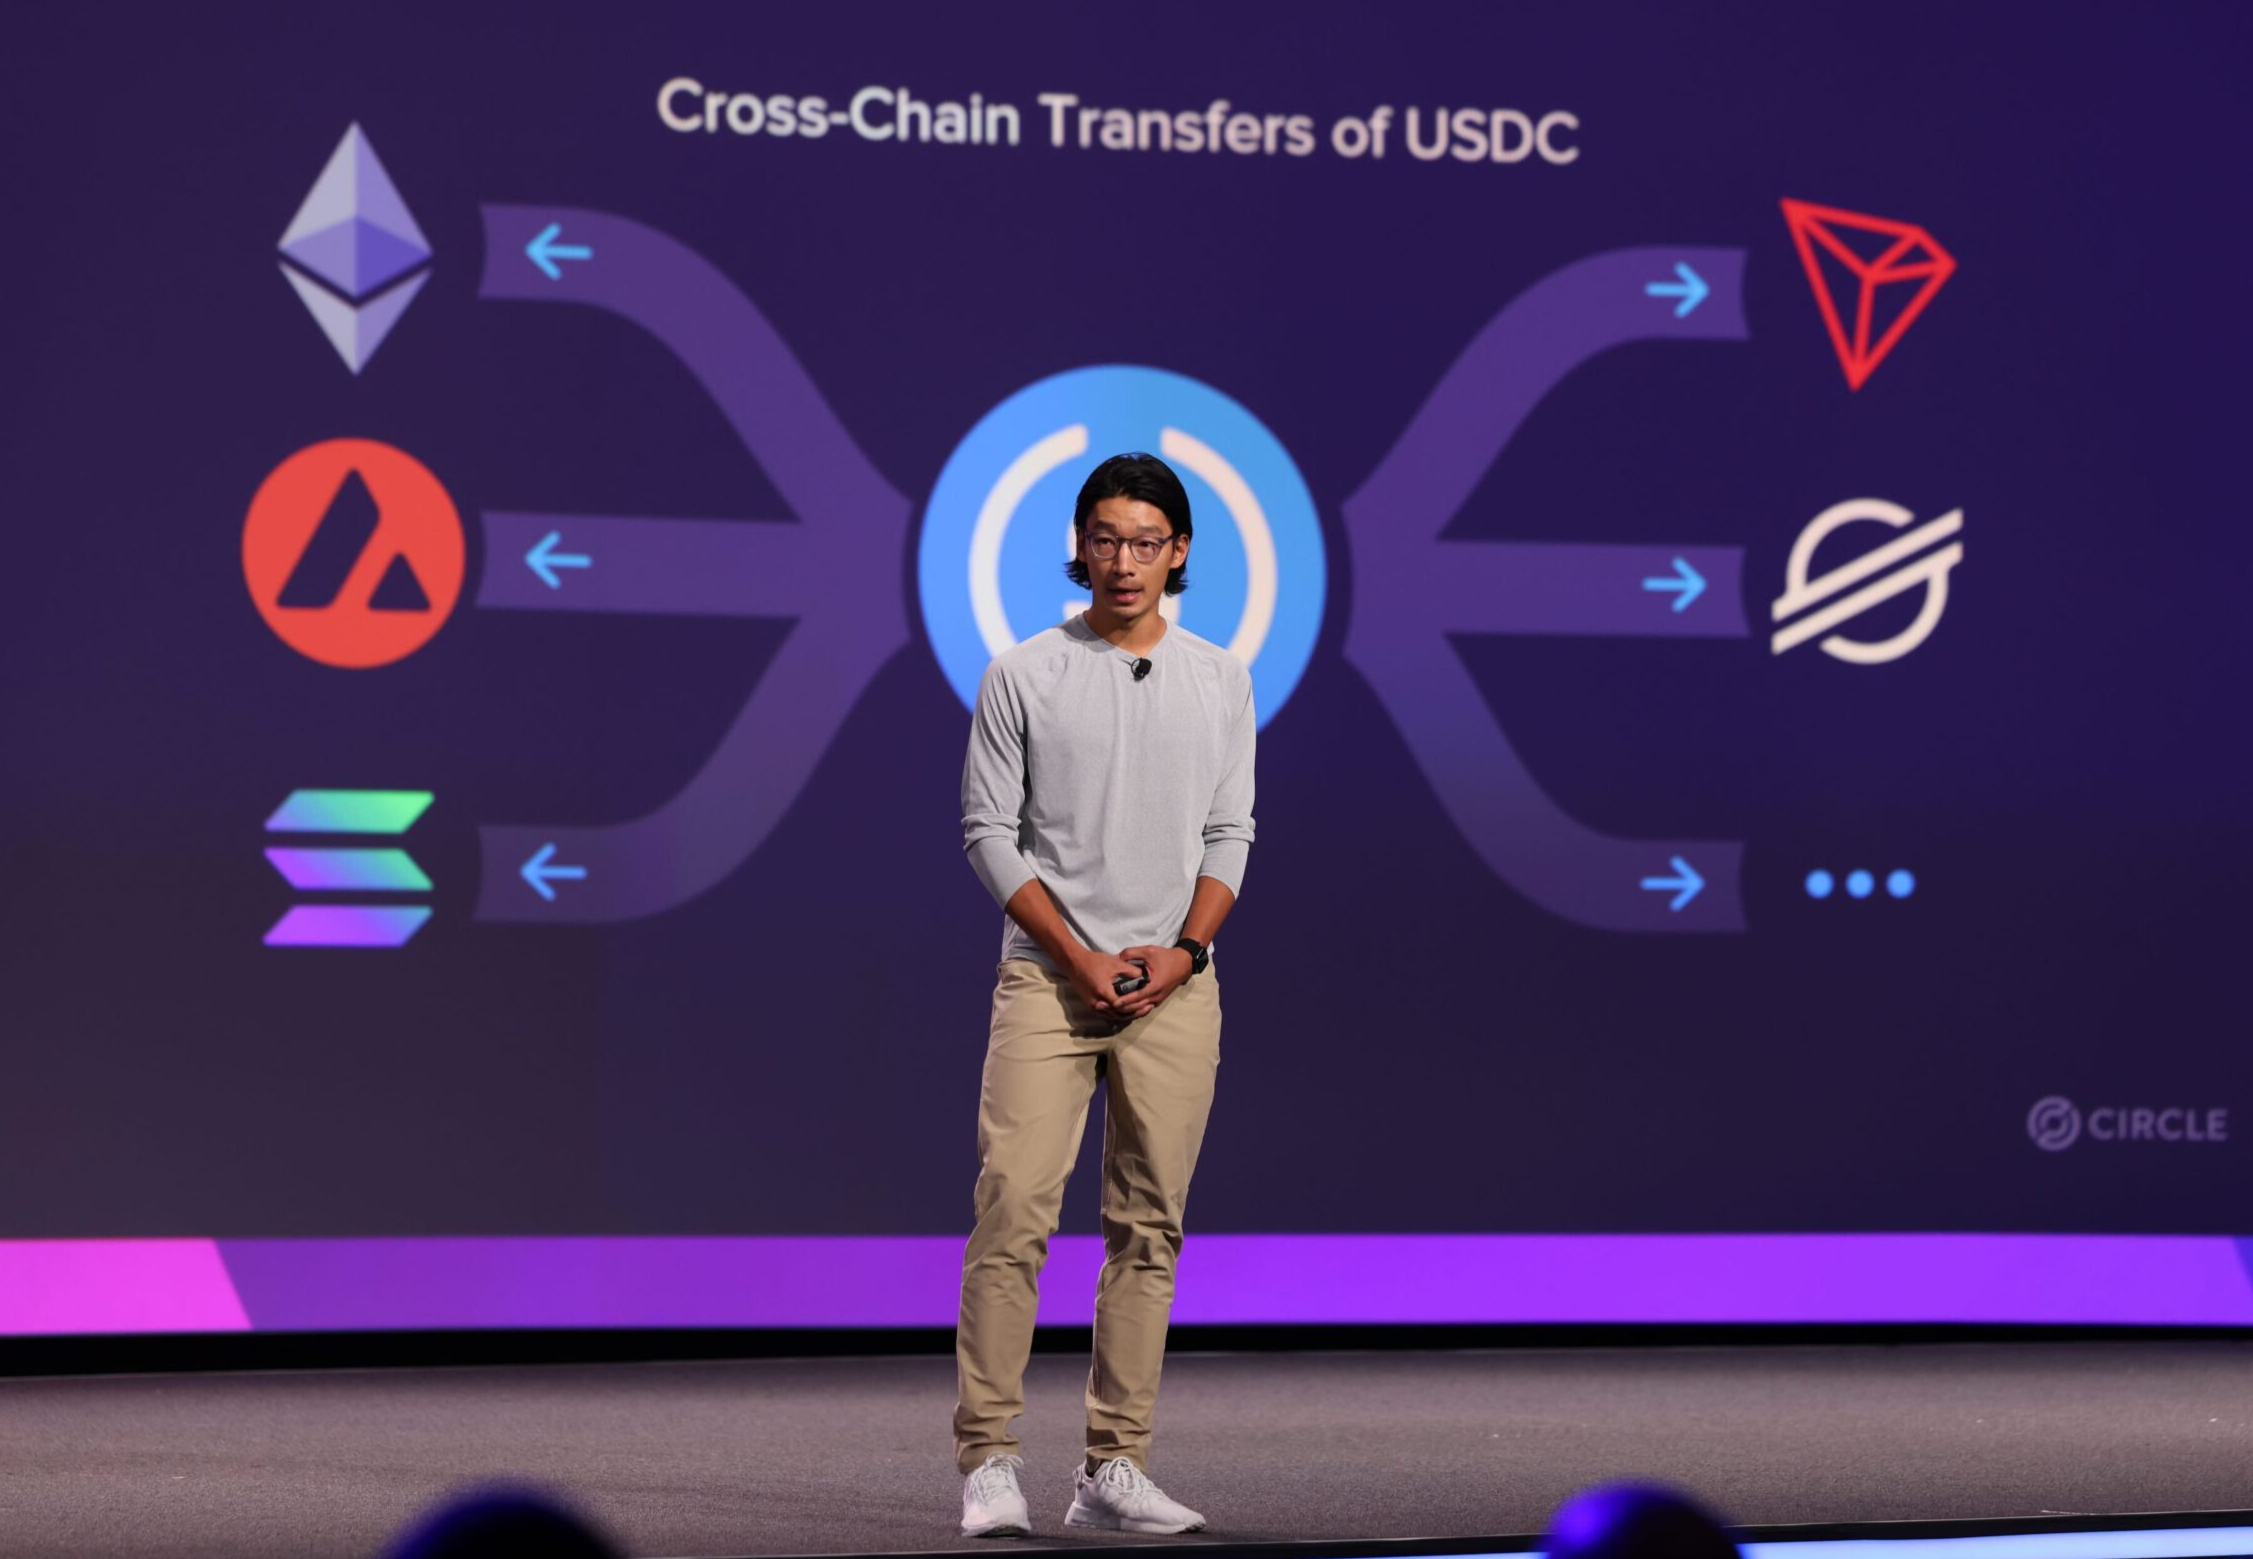 USDC stablecoin will be developed cross-chain oriented, supporting 5 new blockchains